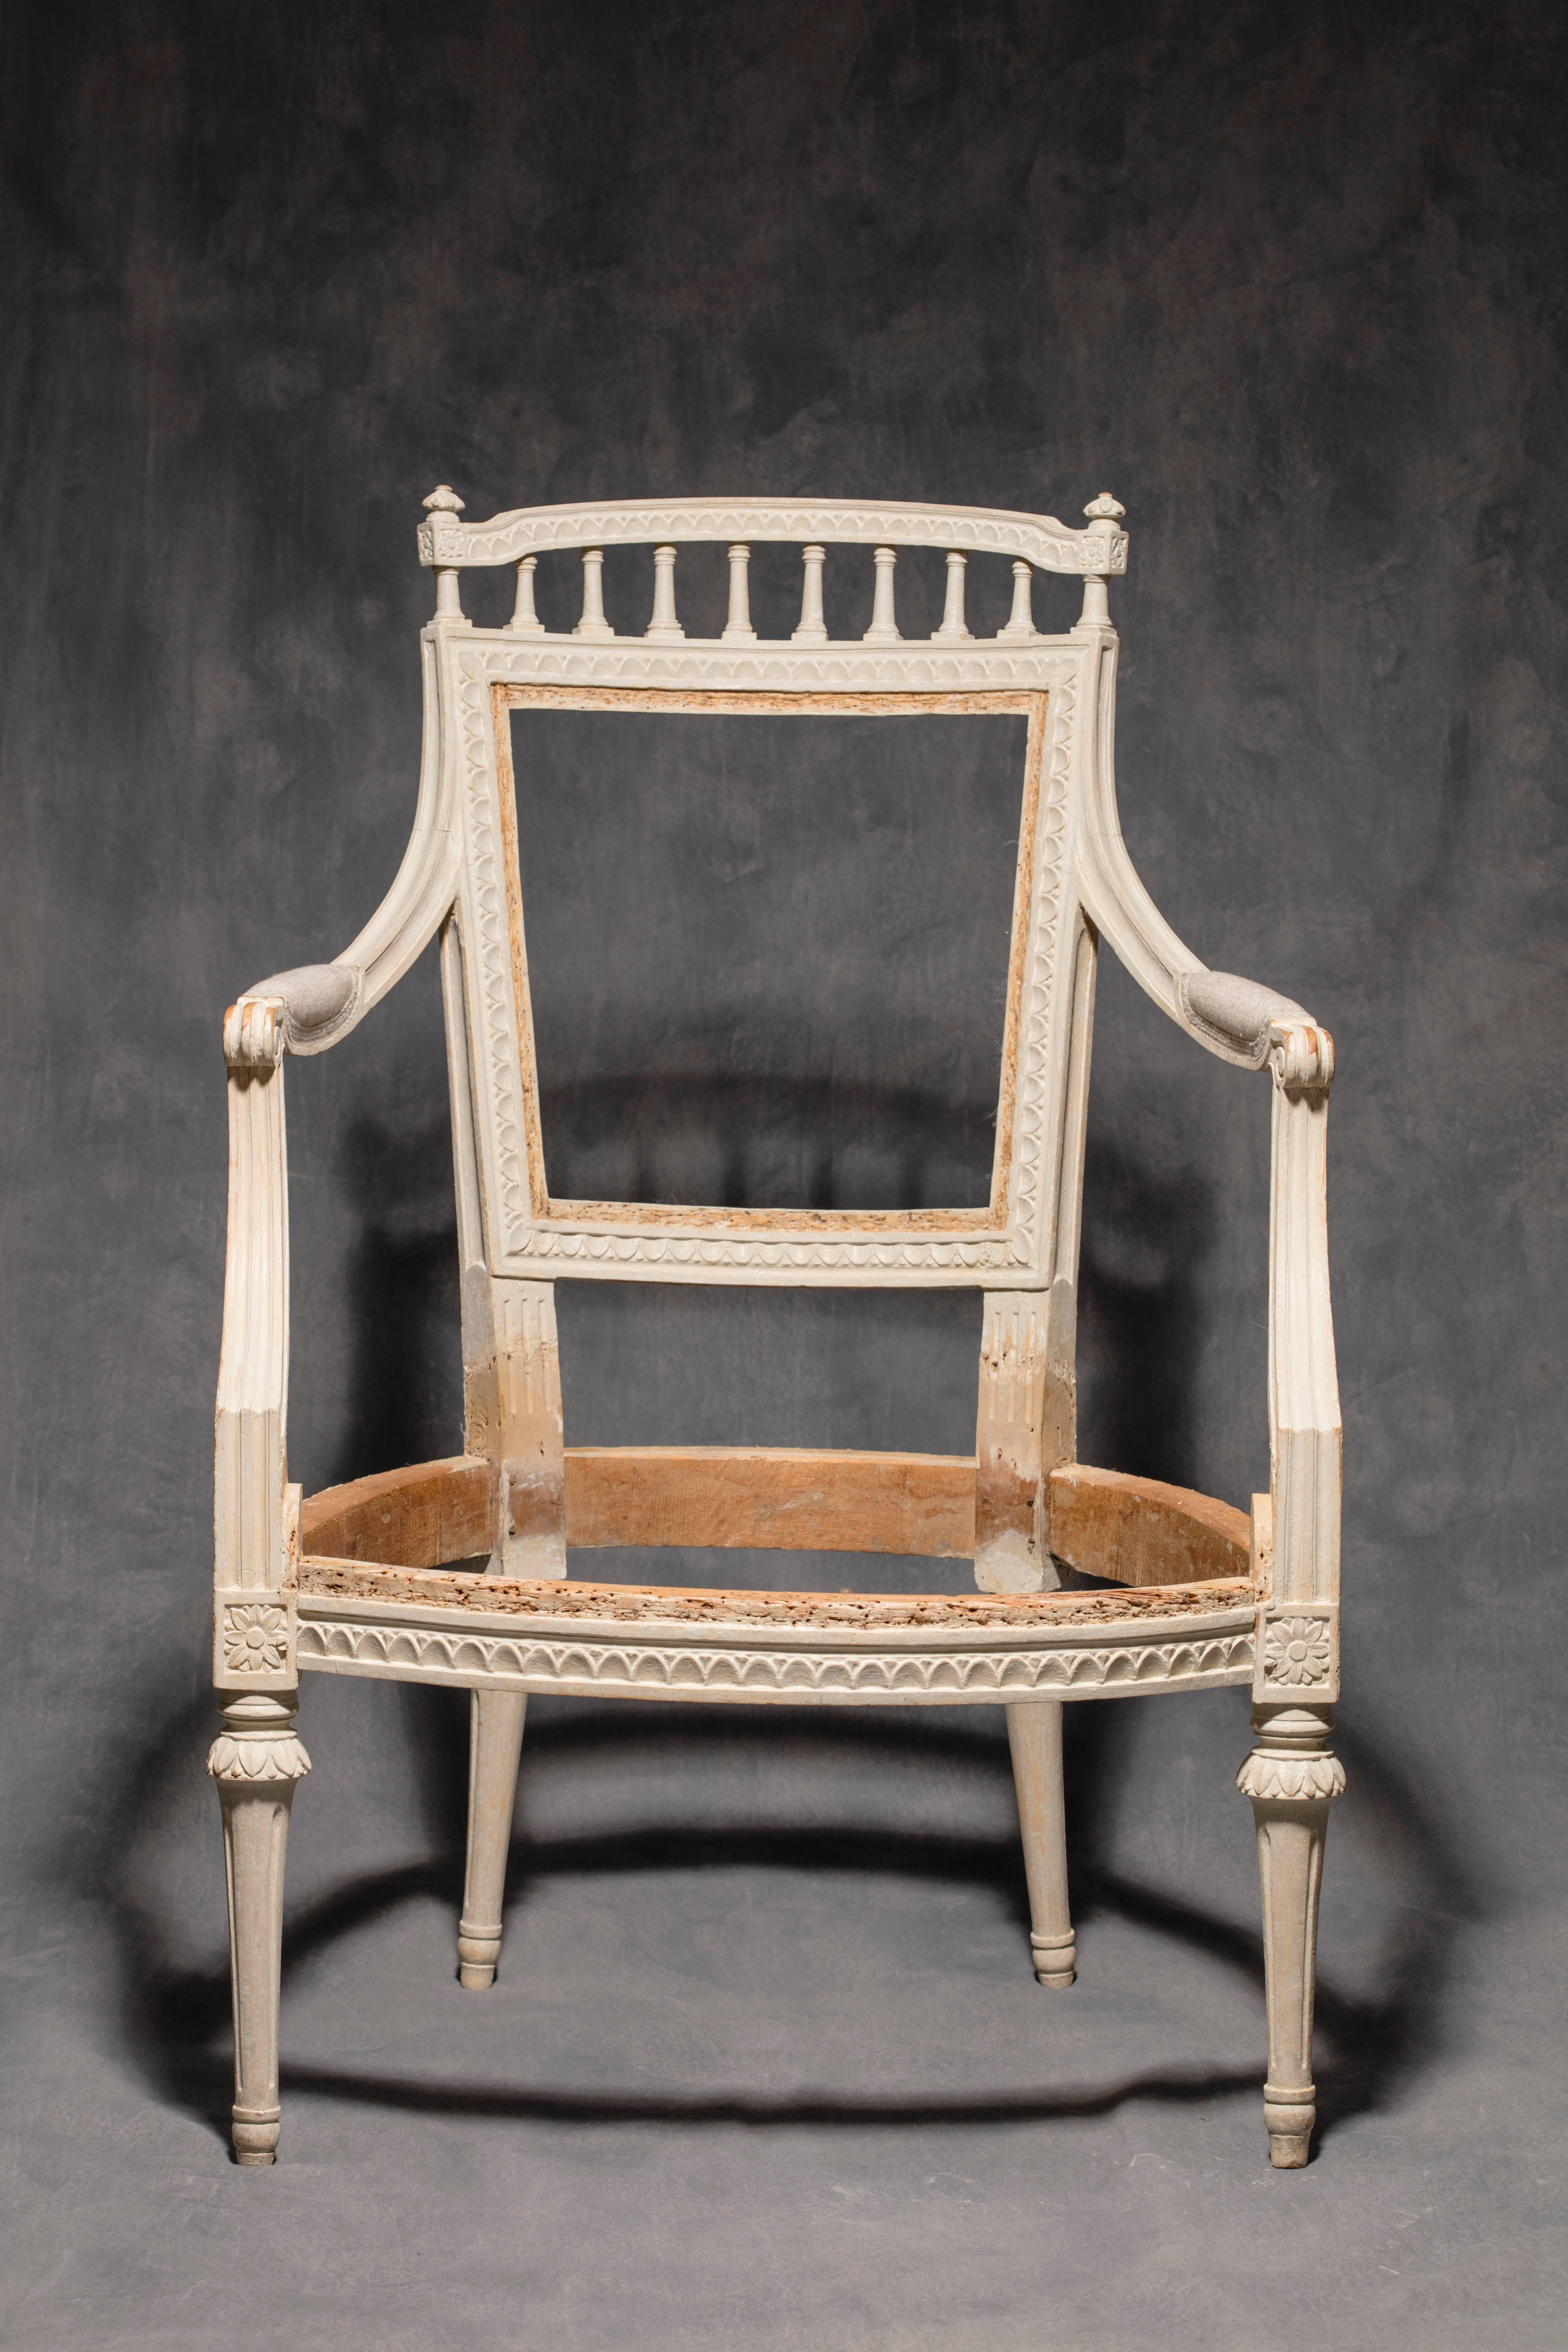 An excellent pair of painted Gustavian armchairs signed and hallmarked Johan Erik Höglander, Stockholm circa 1790, original paint with some minor retouching.